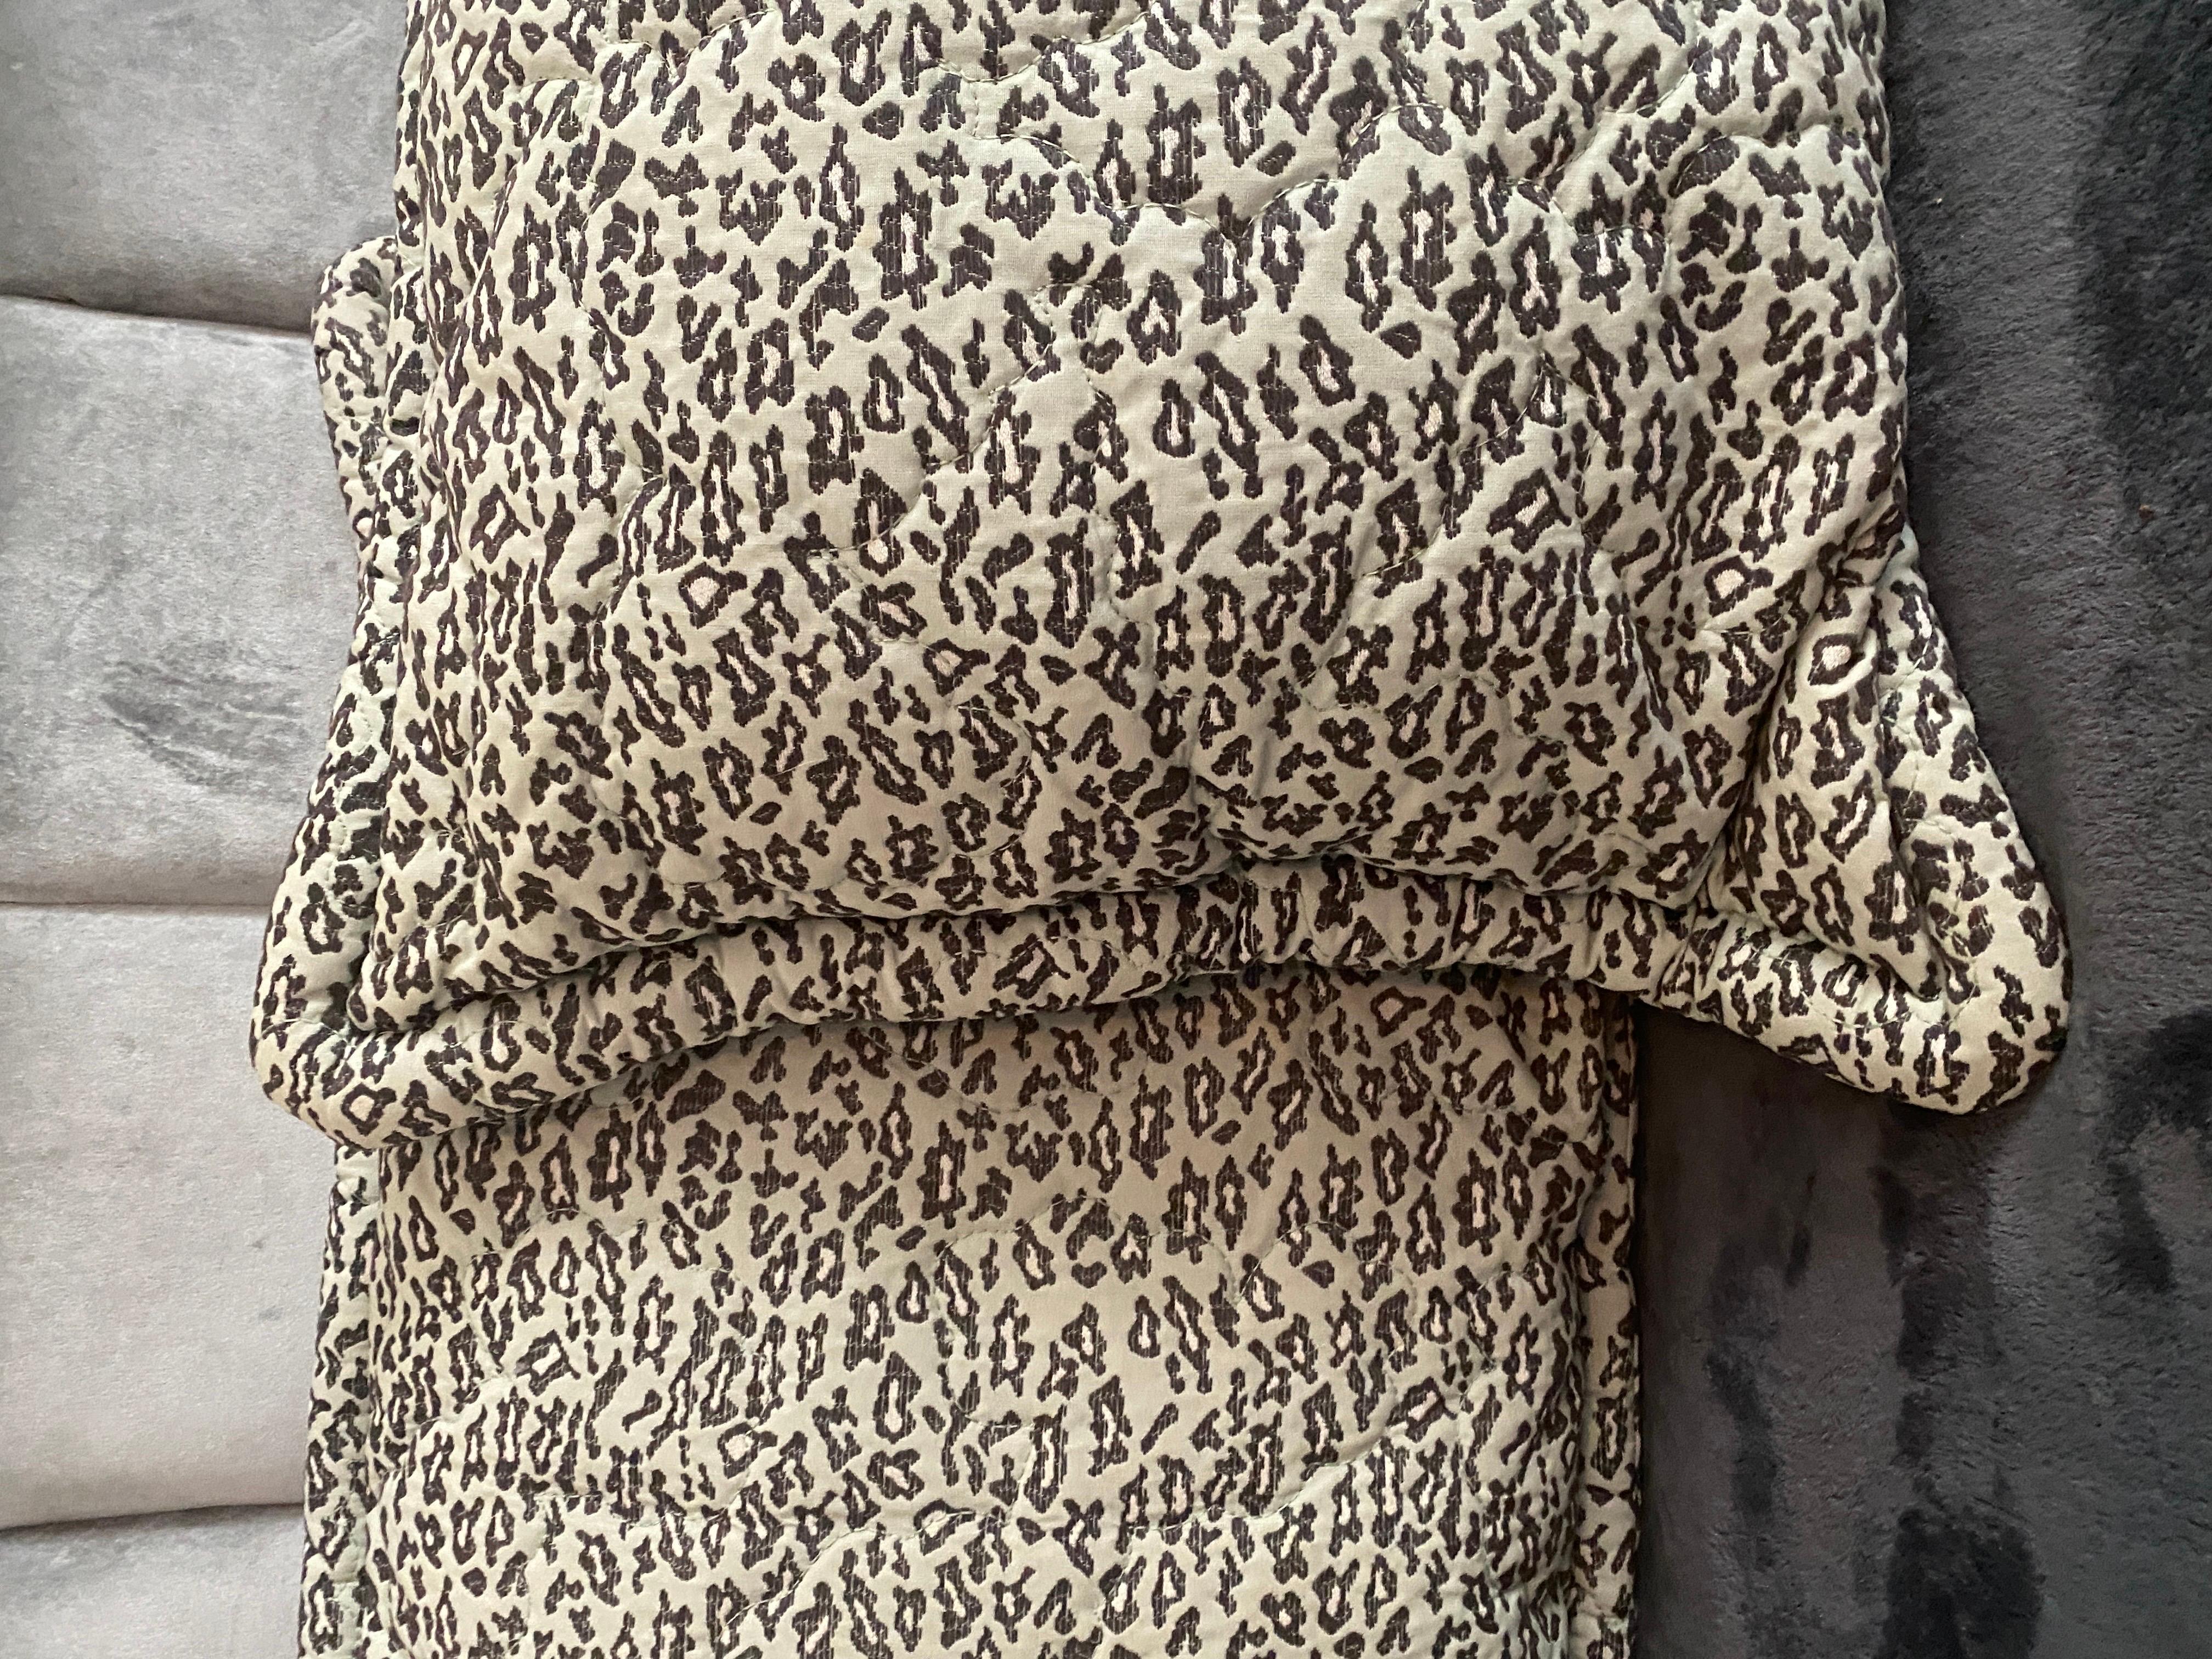 Pair of Rare Jay Spectre Quilted Pillow Shams in Mint & Black/White Leopard  For Sale 4